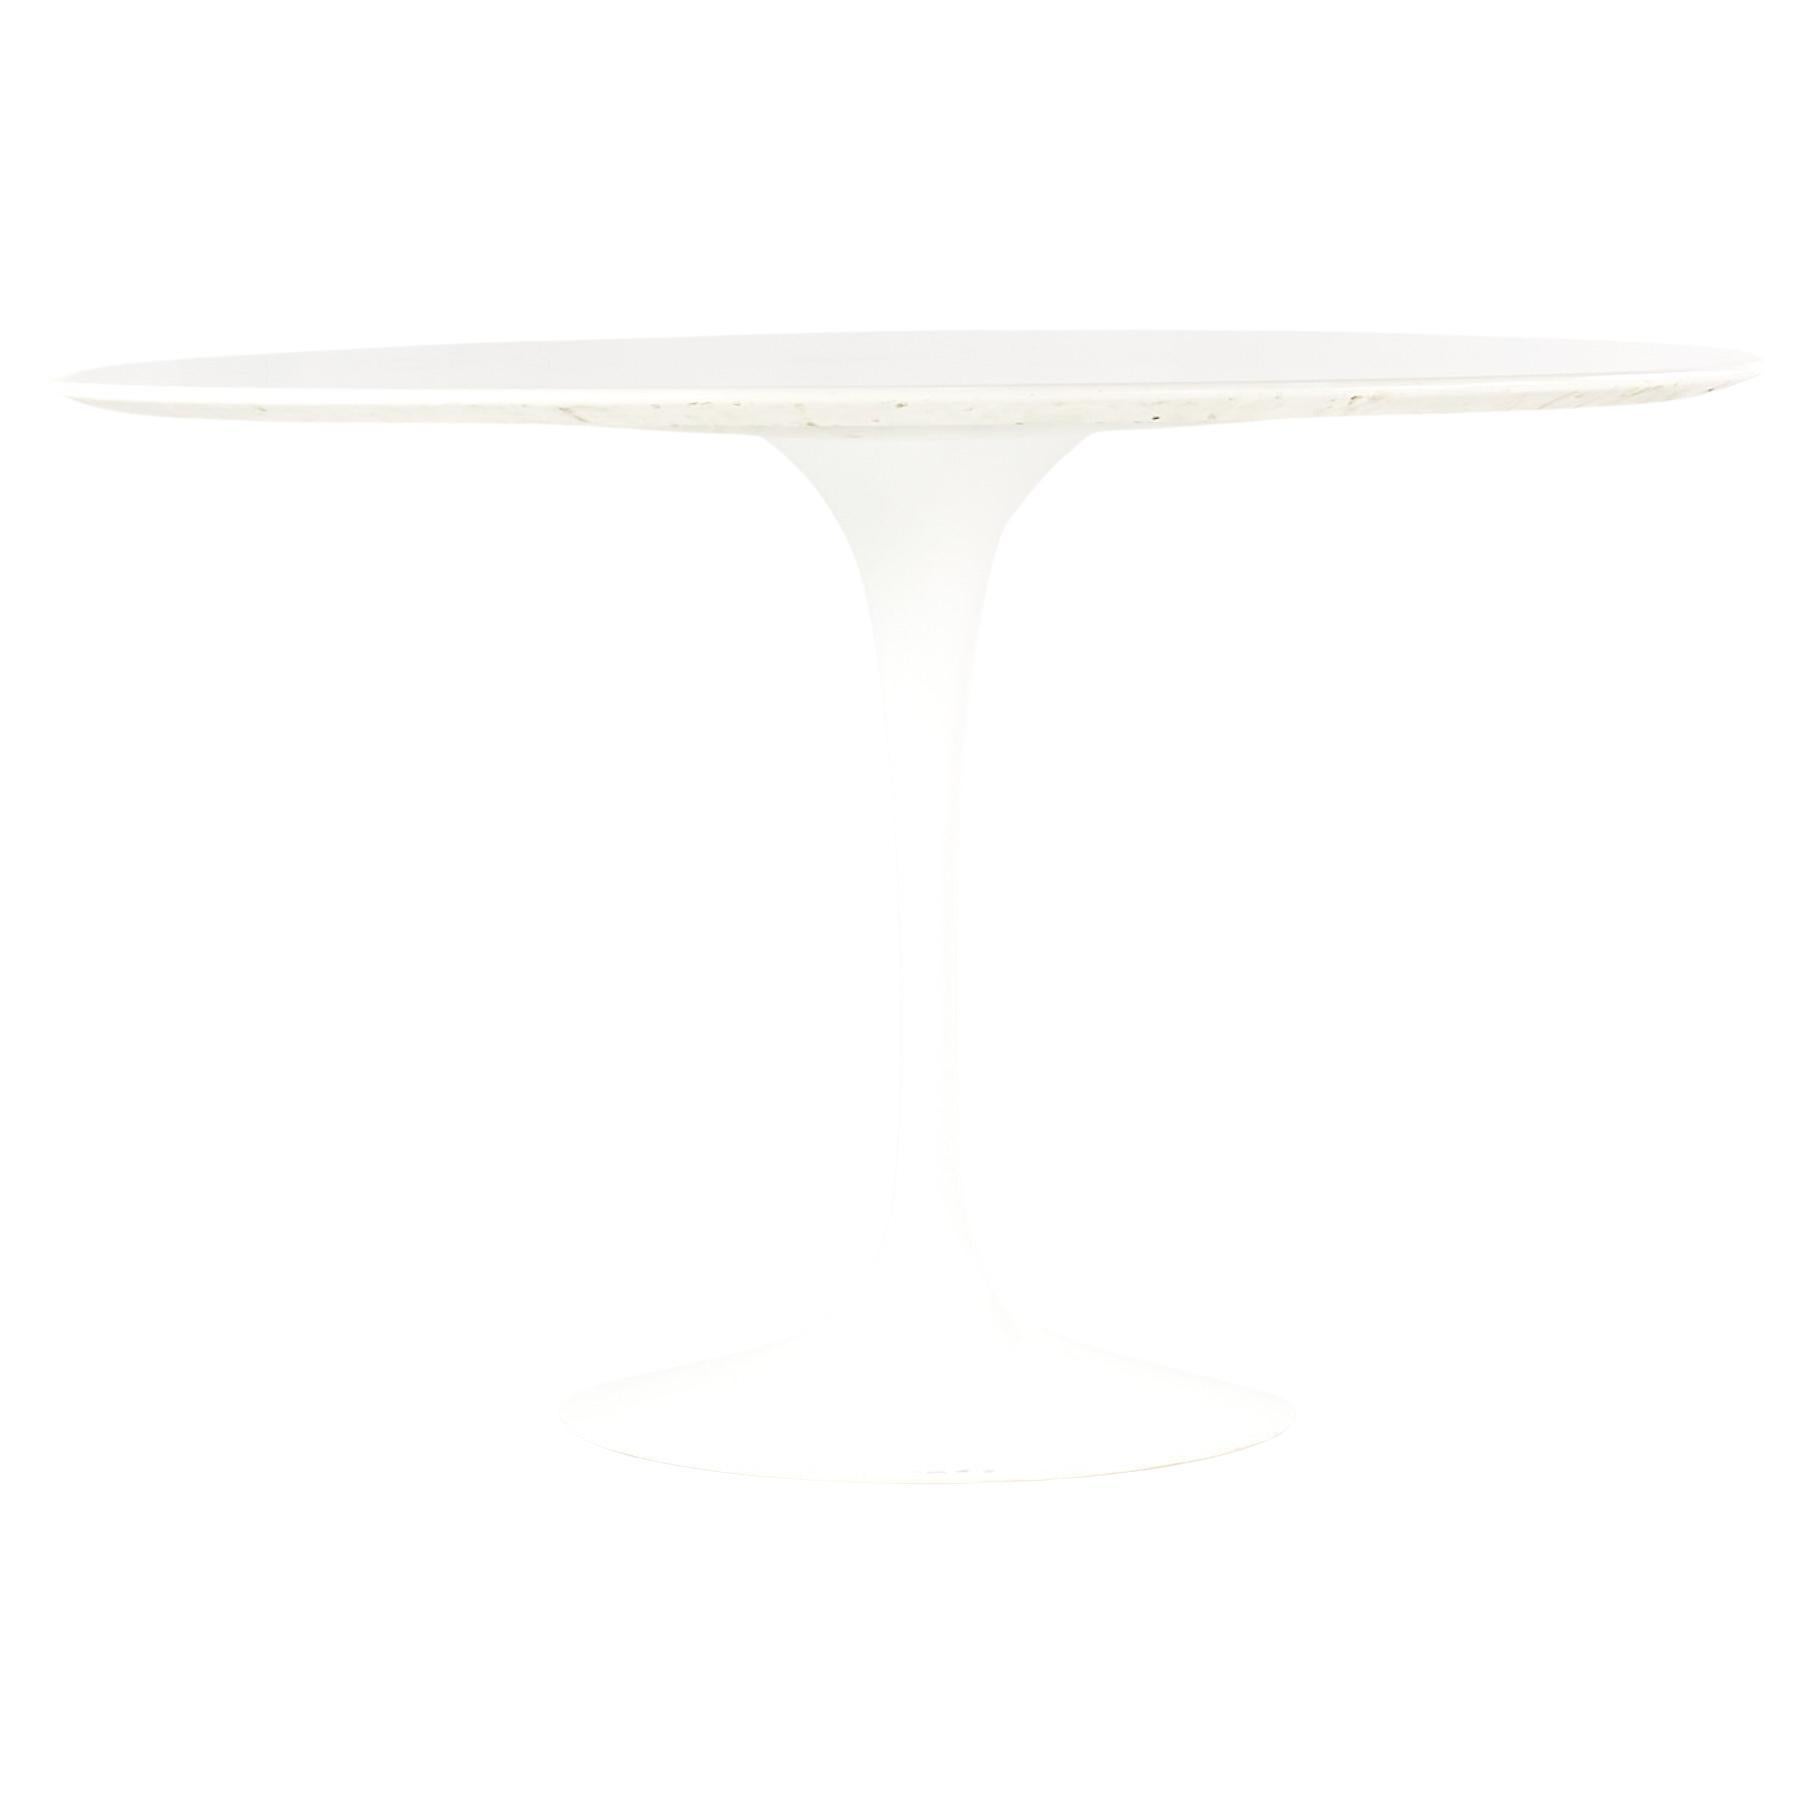 Eero Saarinen for Knoll mid century Tulip table

This dining table measures: 47.25 wide x 47.25 deep x 28.5 inches high, with a chair clearance of 27.5 inches

All pieces of furniture can be had in what we call restored vintage condition. That